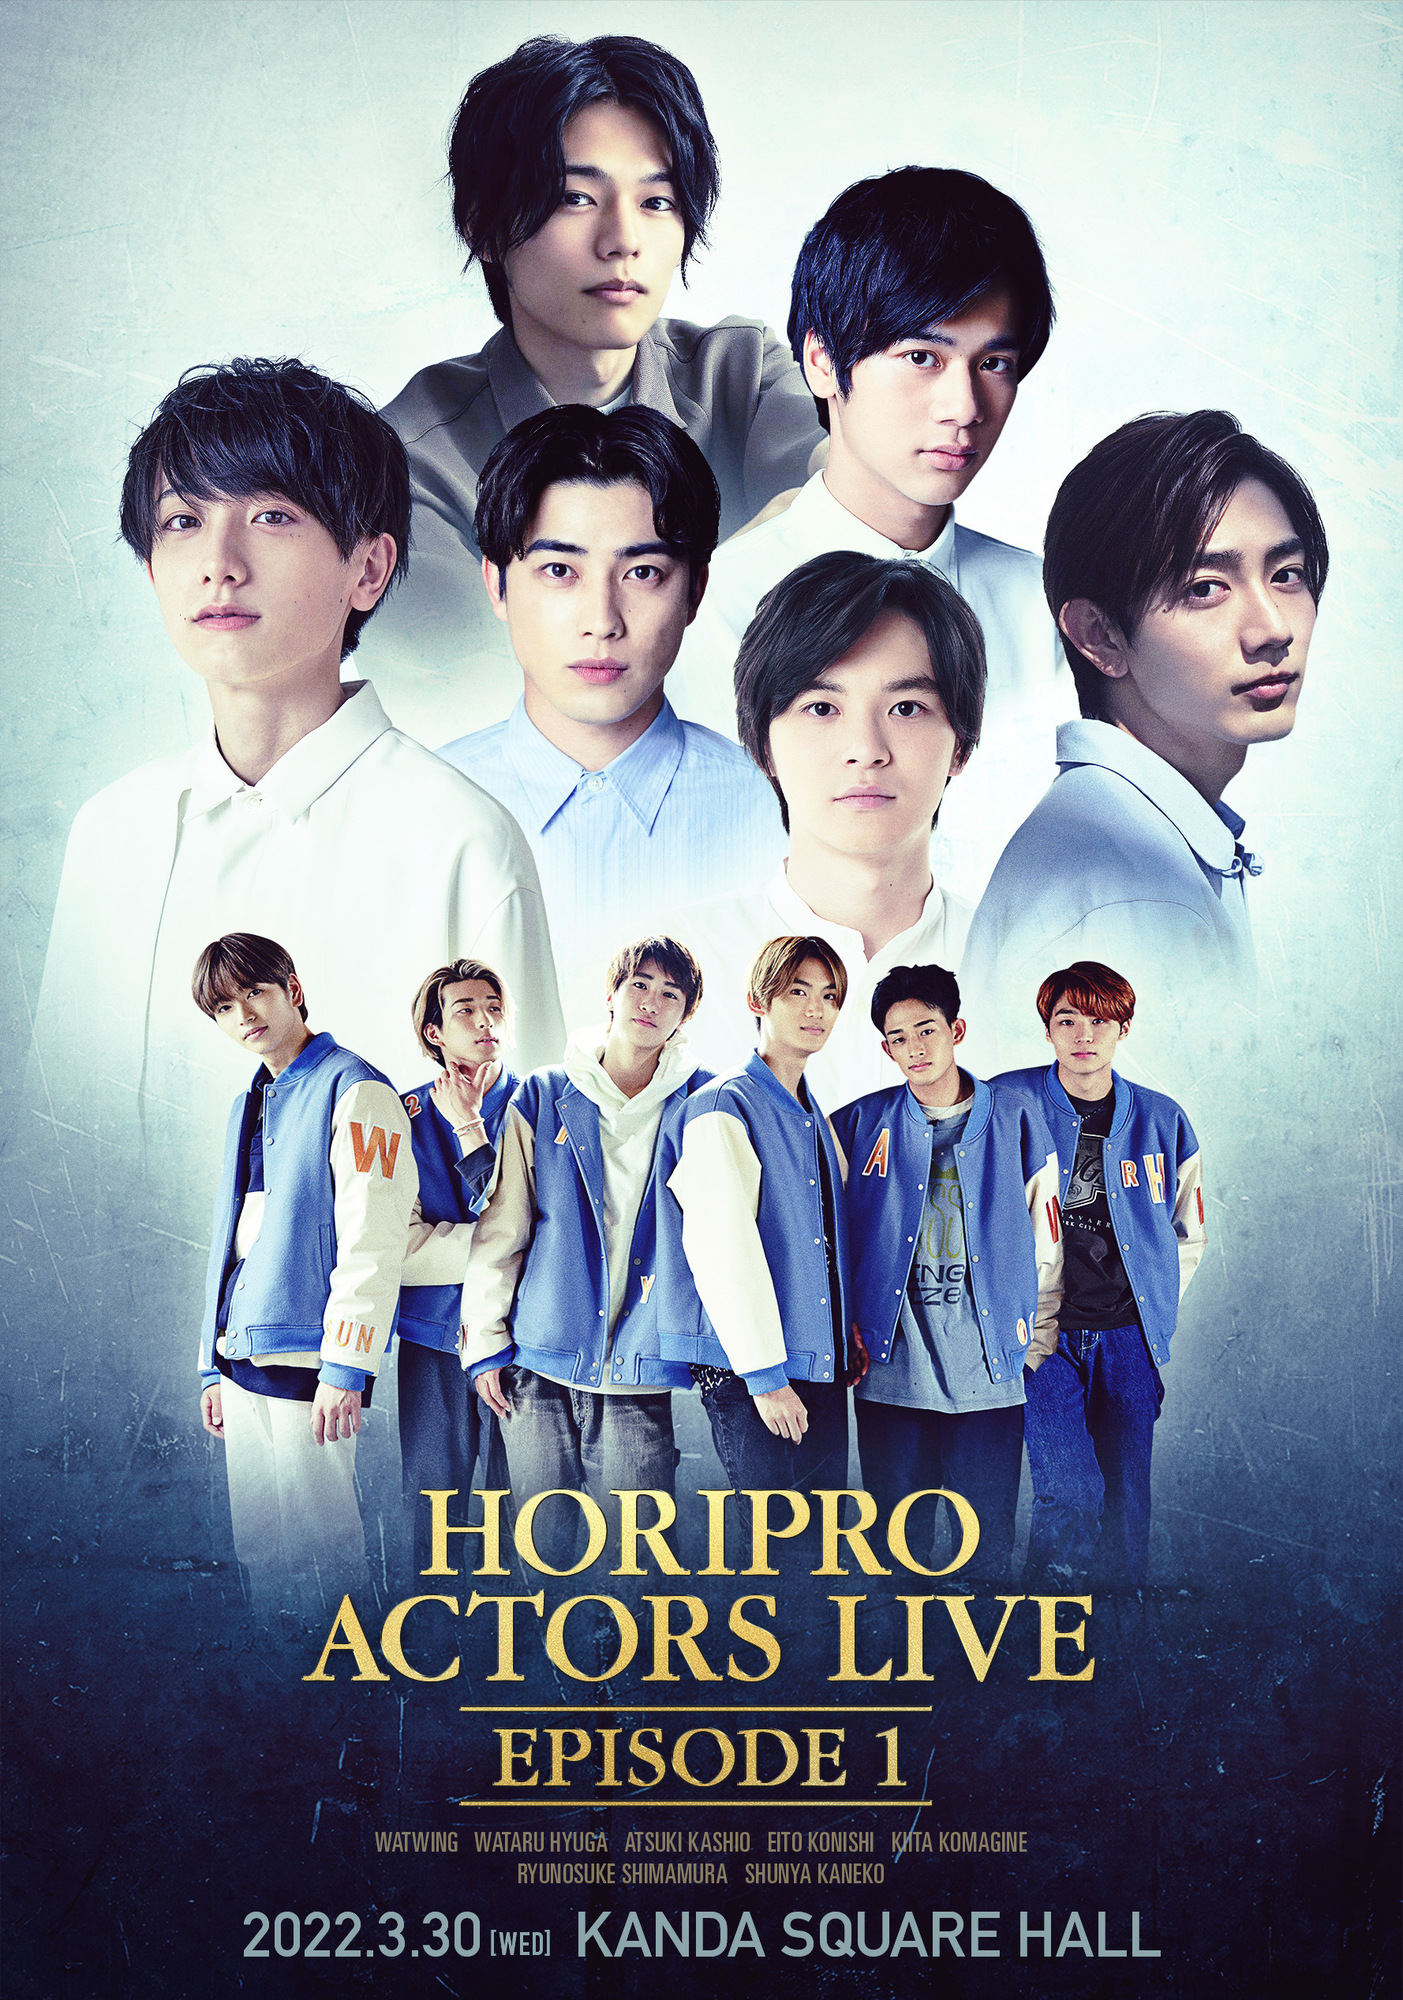 Horipro Actors Live～episode 1～』出演決定！ | WATWING official Site